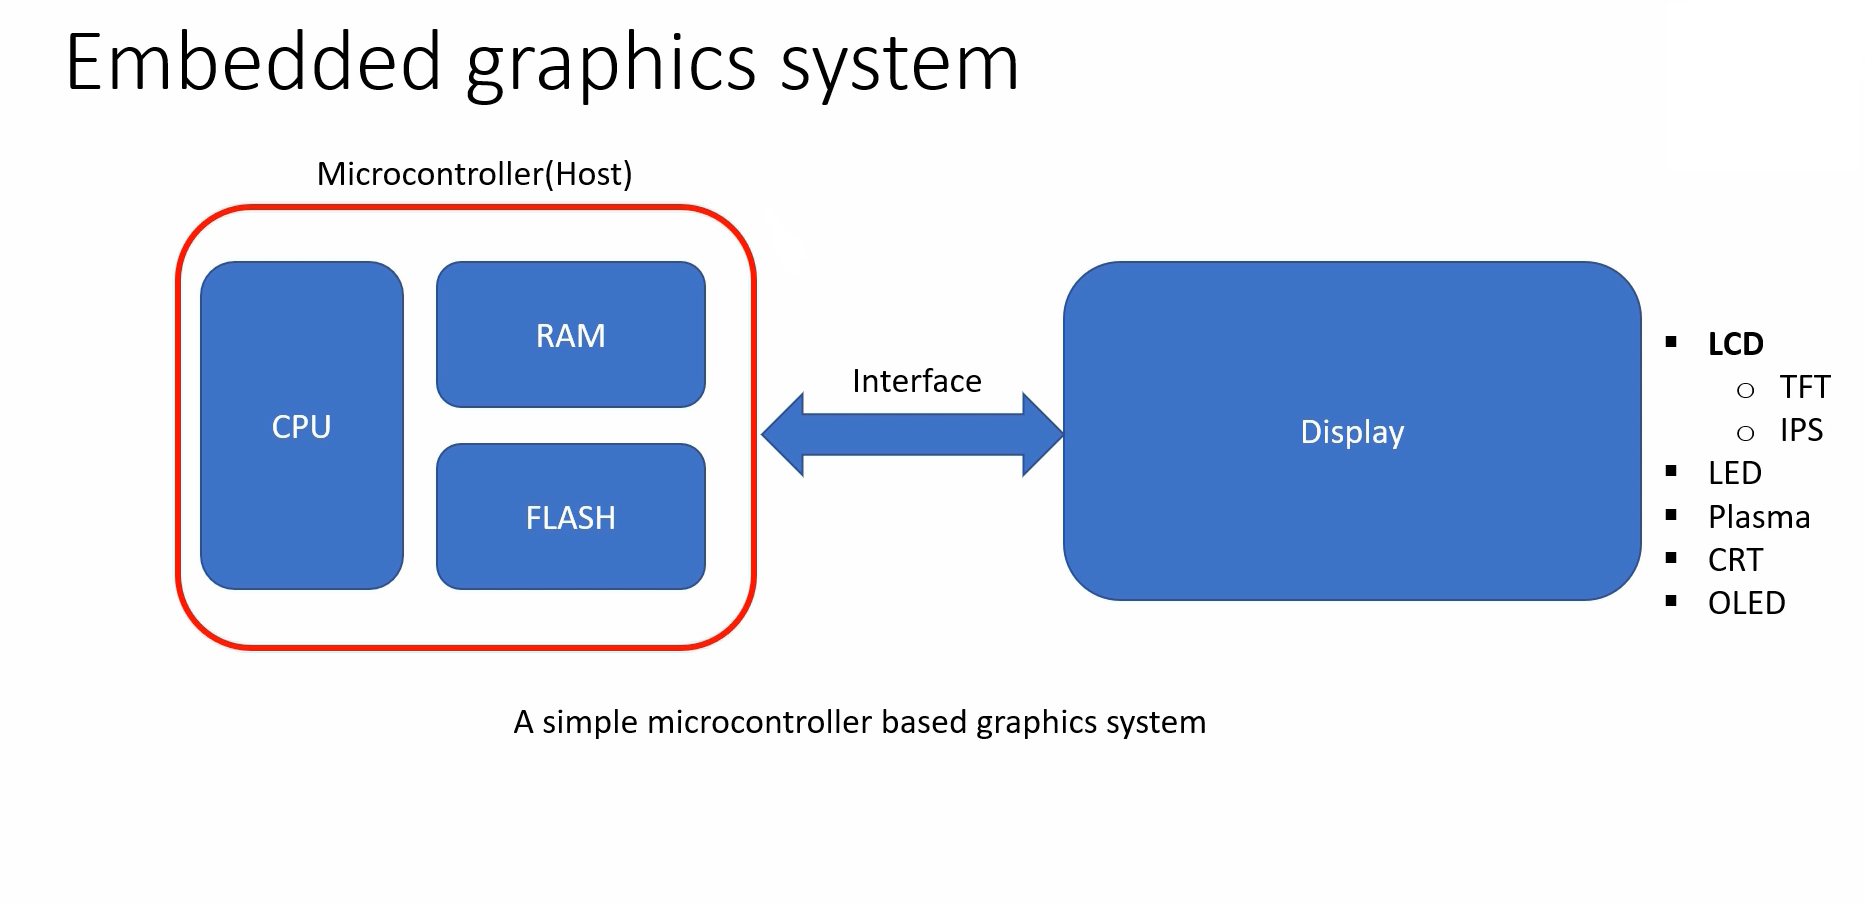 Figure 1. Simple microcontroller based graphics system